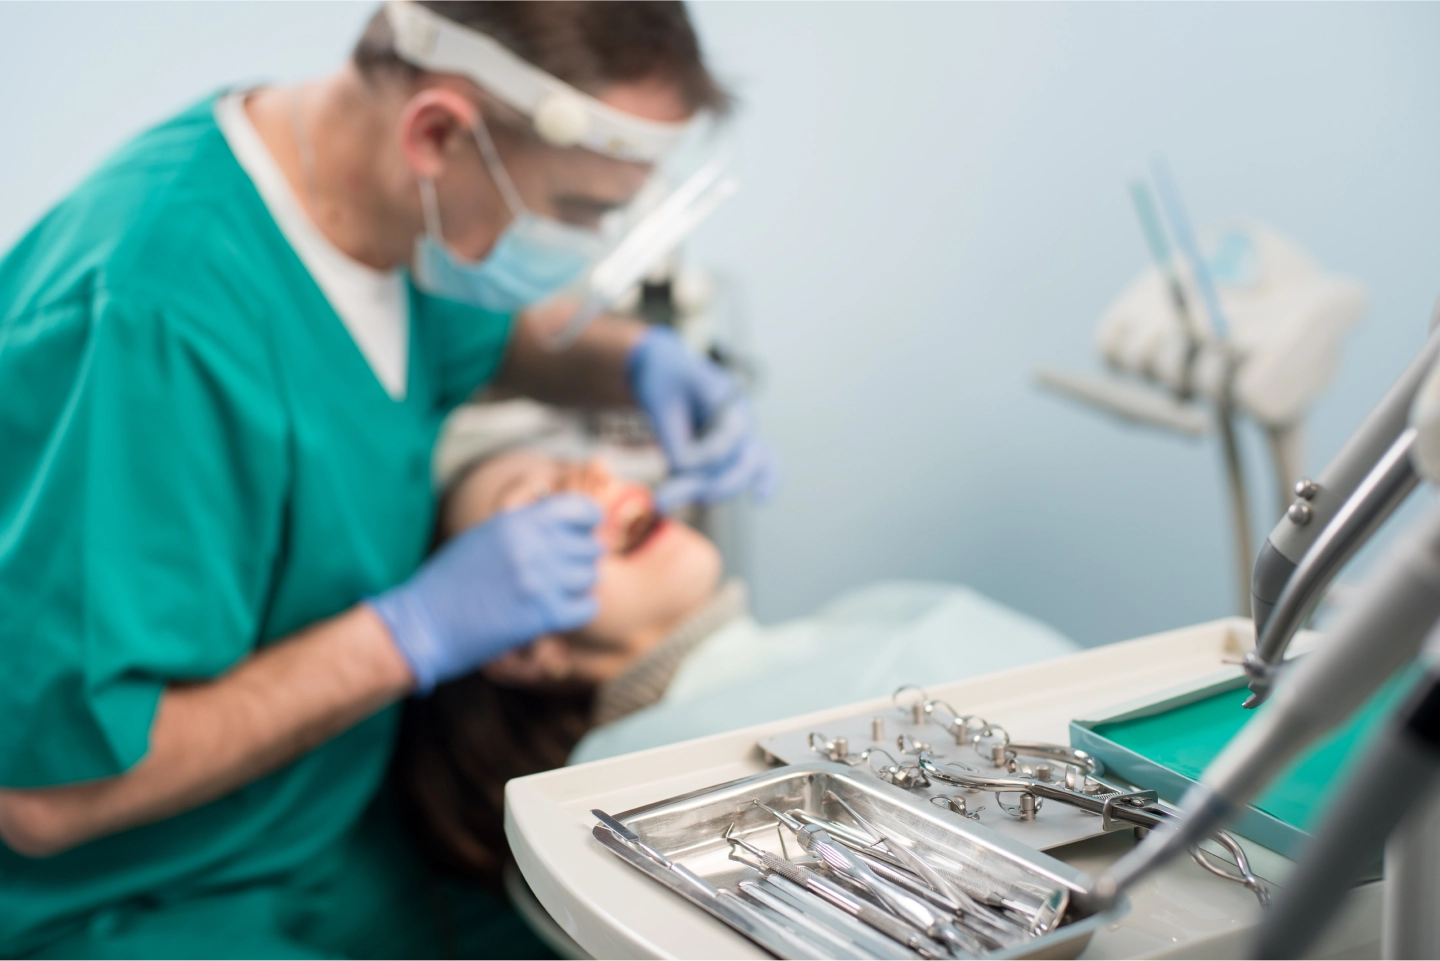 Can a General Dentist Receive Endodontic Training to Perform Periodontic Care?